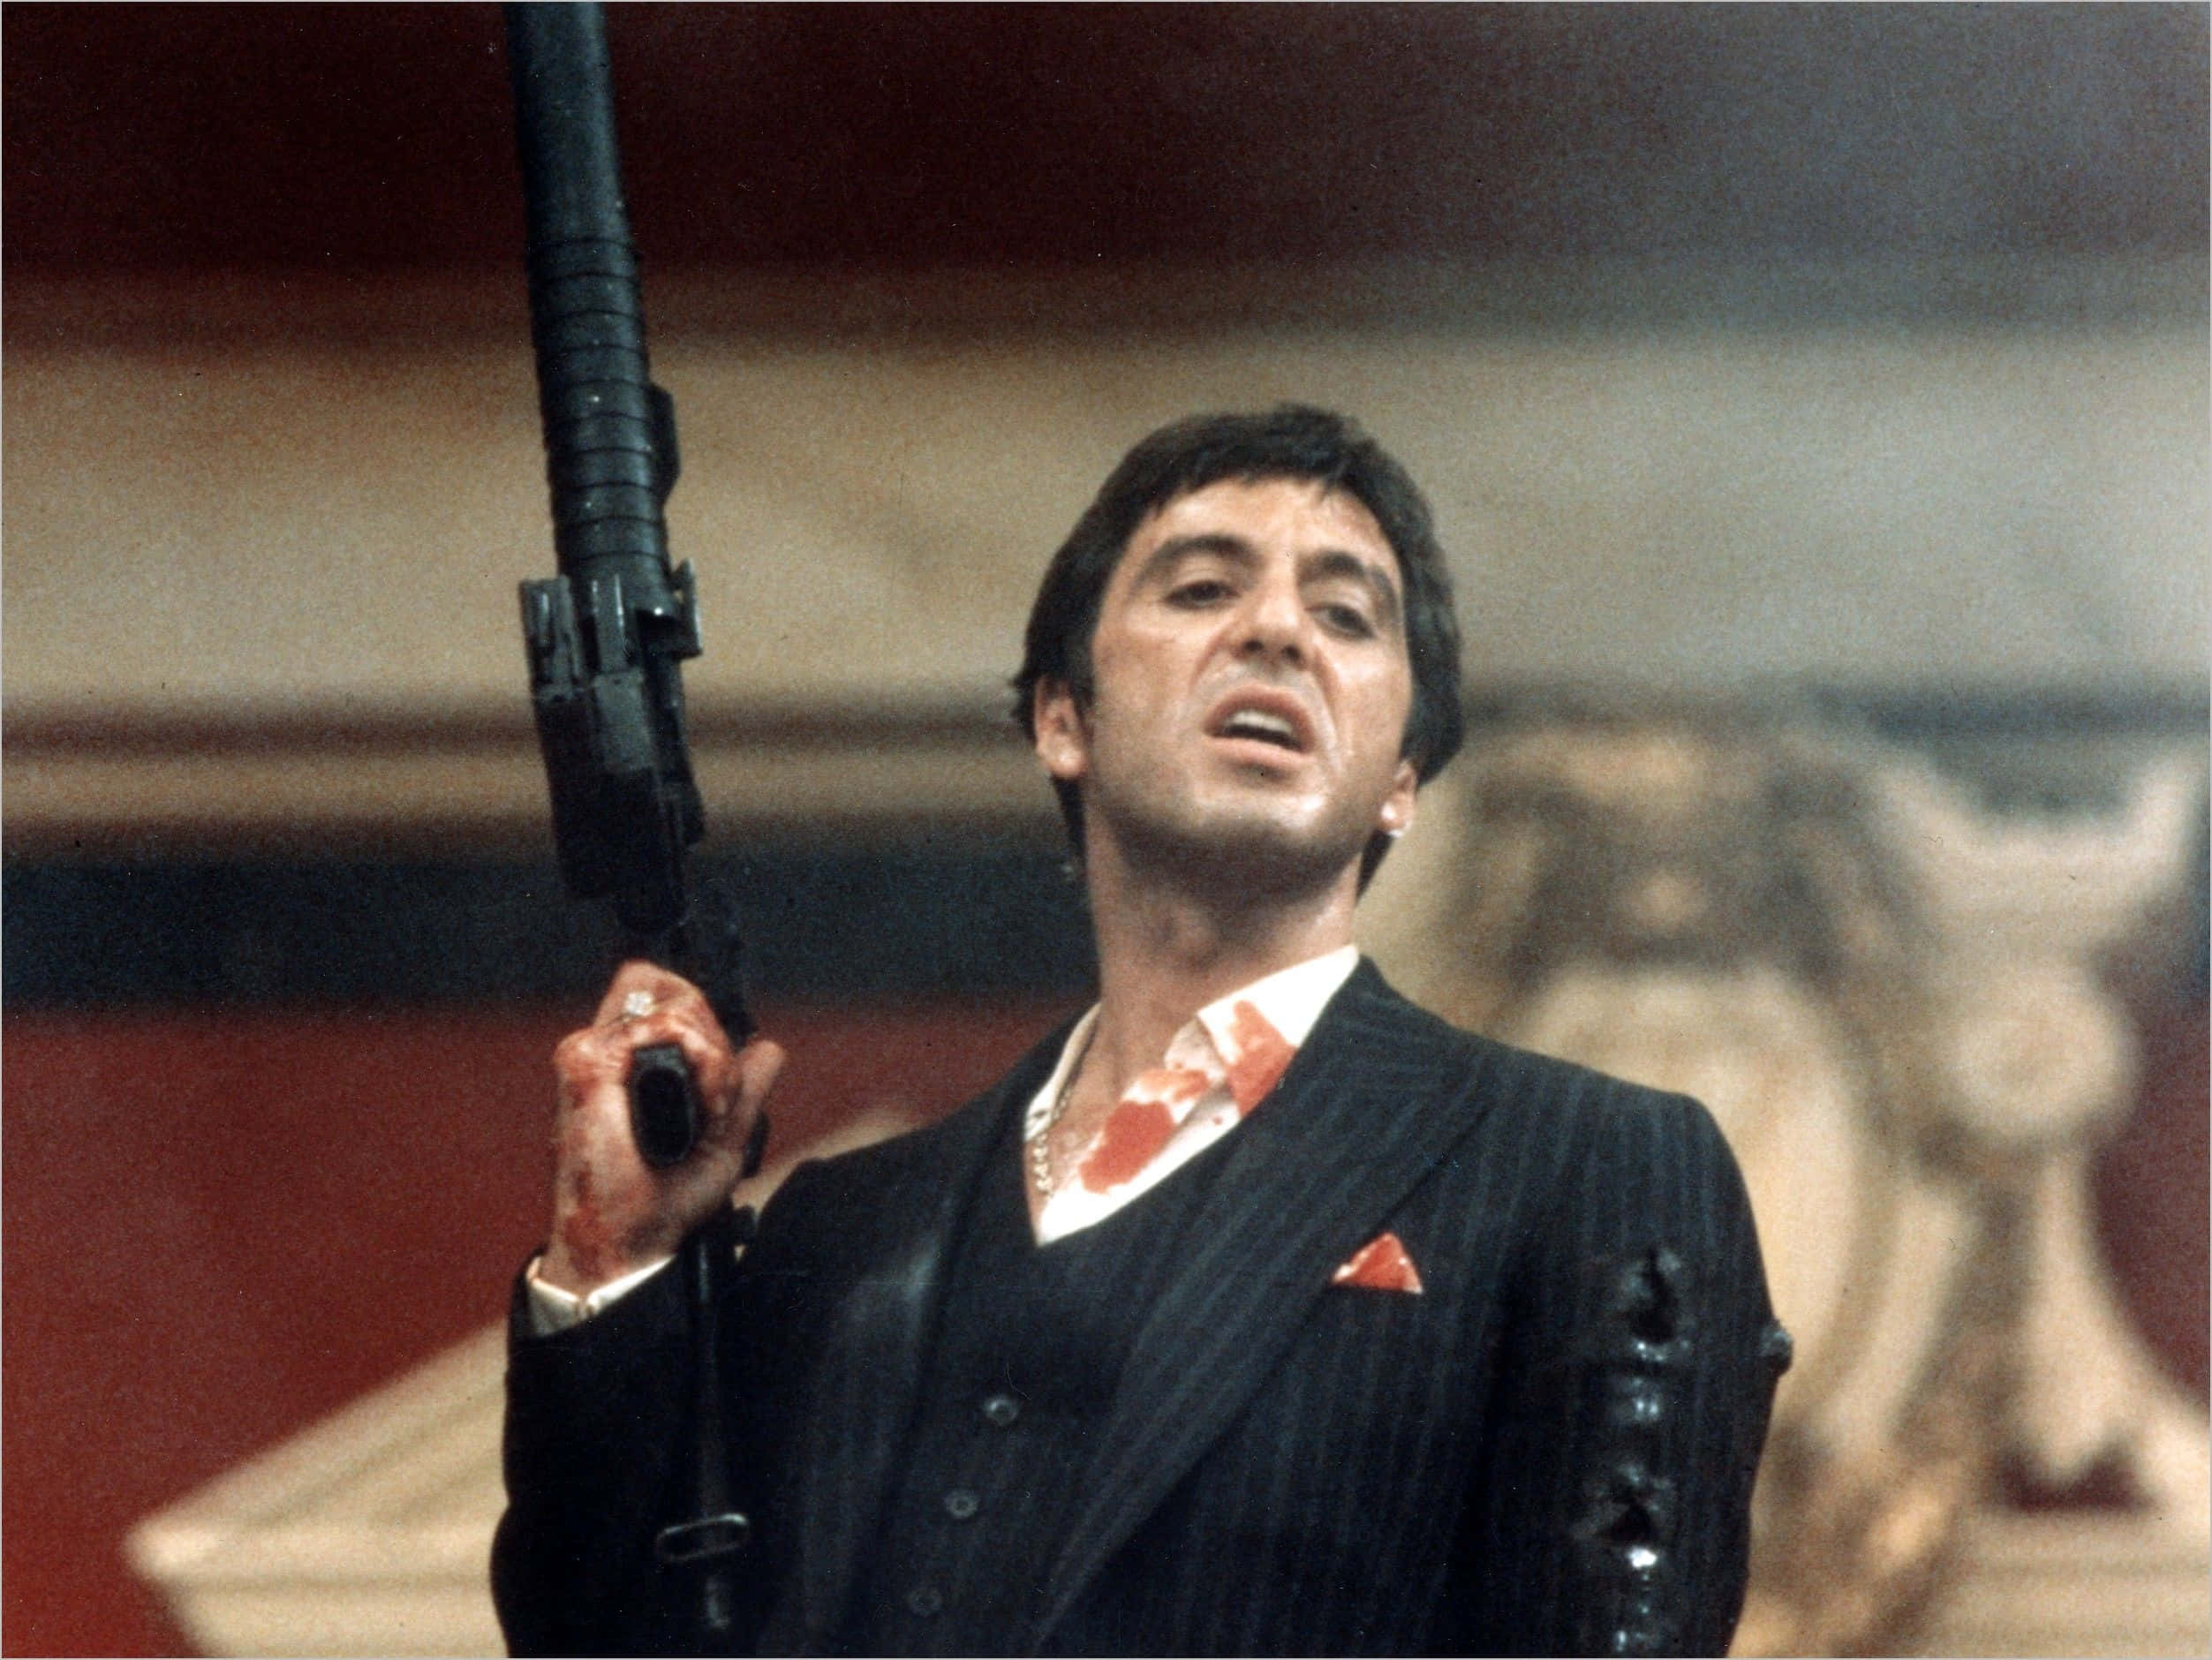 Al Pacino In Scarface